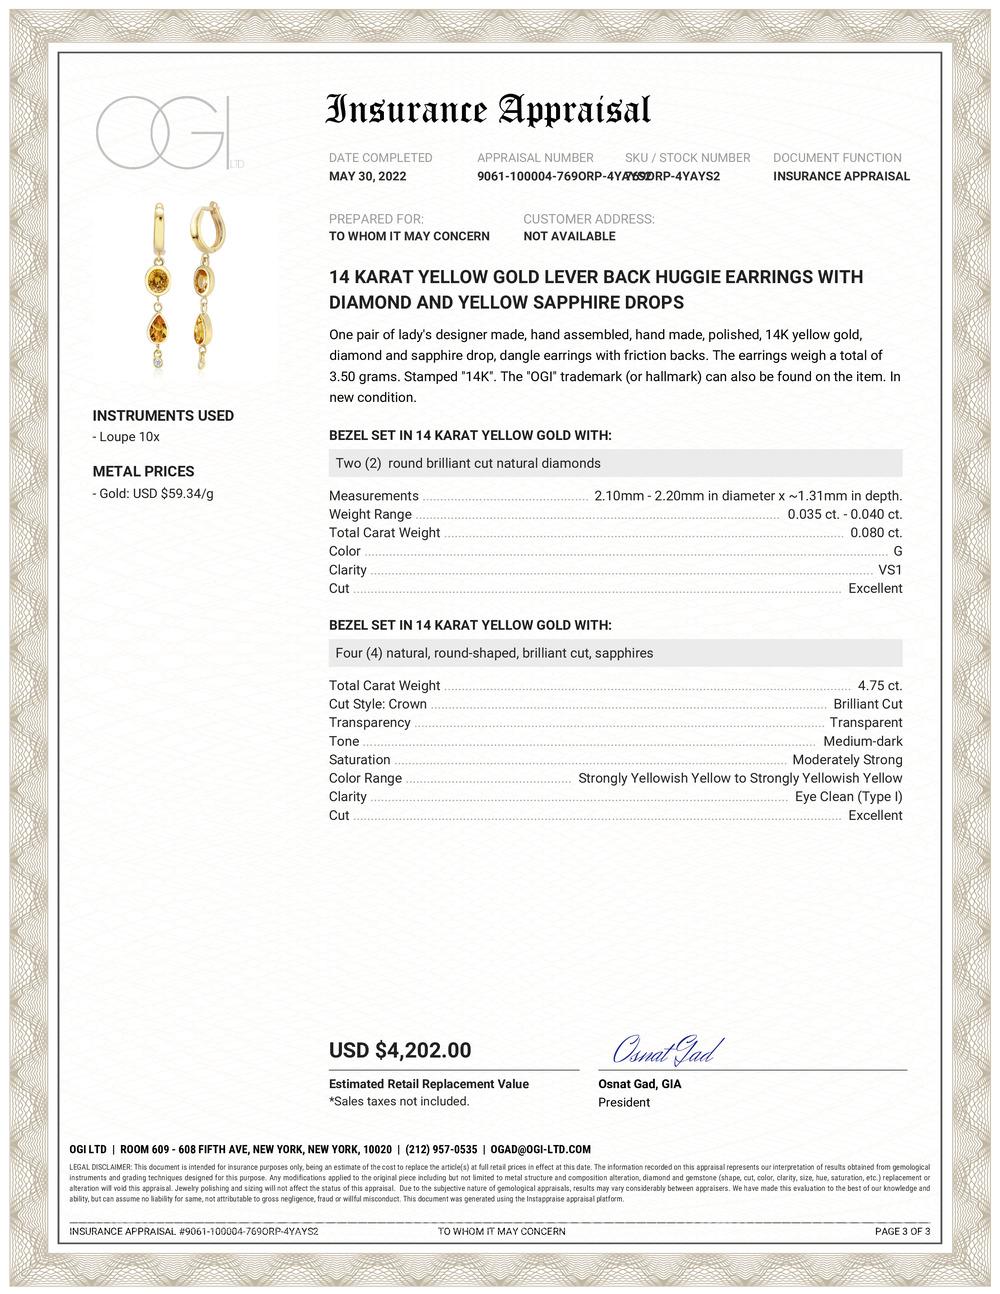 Fourteen karats yellow gold lever back huggie hoop drop earrings
Four bright and shiny yellow cushion and pear shaped sapphires weighing 4.75 carats
Two round diamond weight 0.08 carat dangling at the bottom of the earrings 
Country of origin